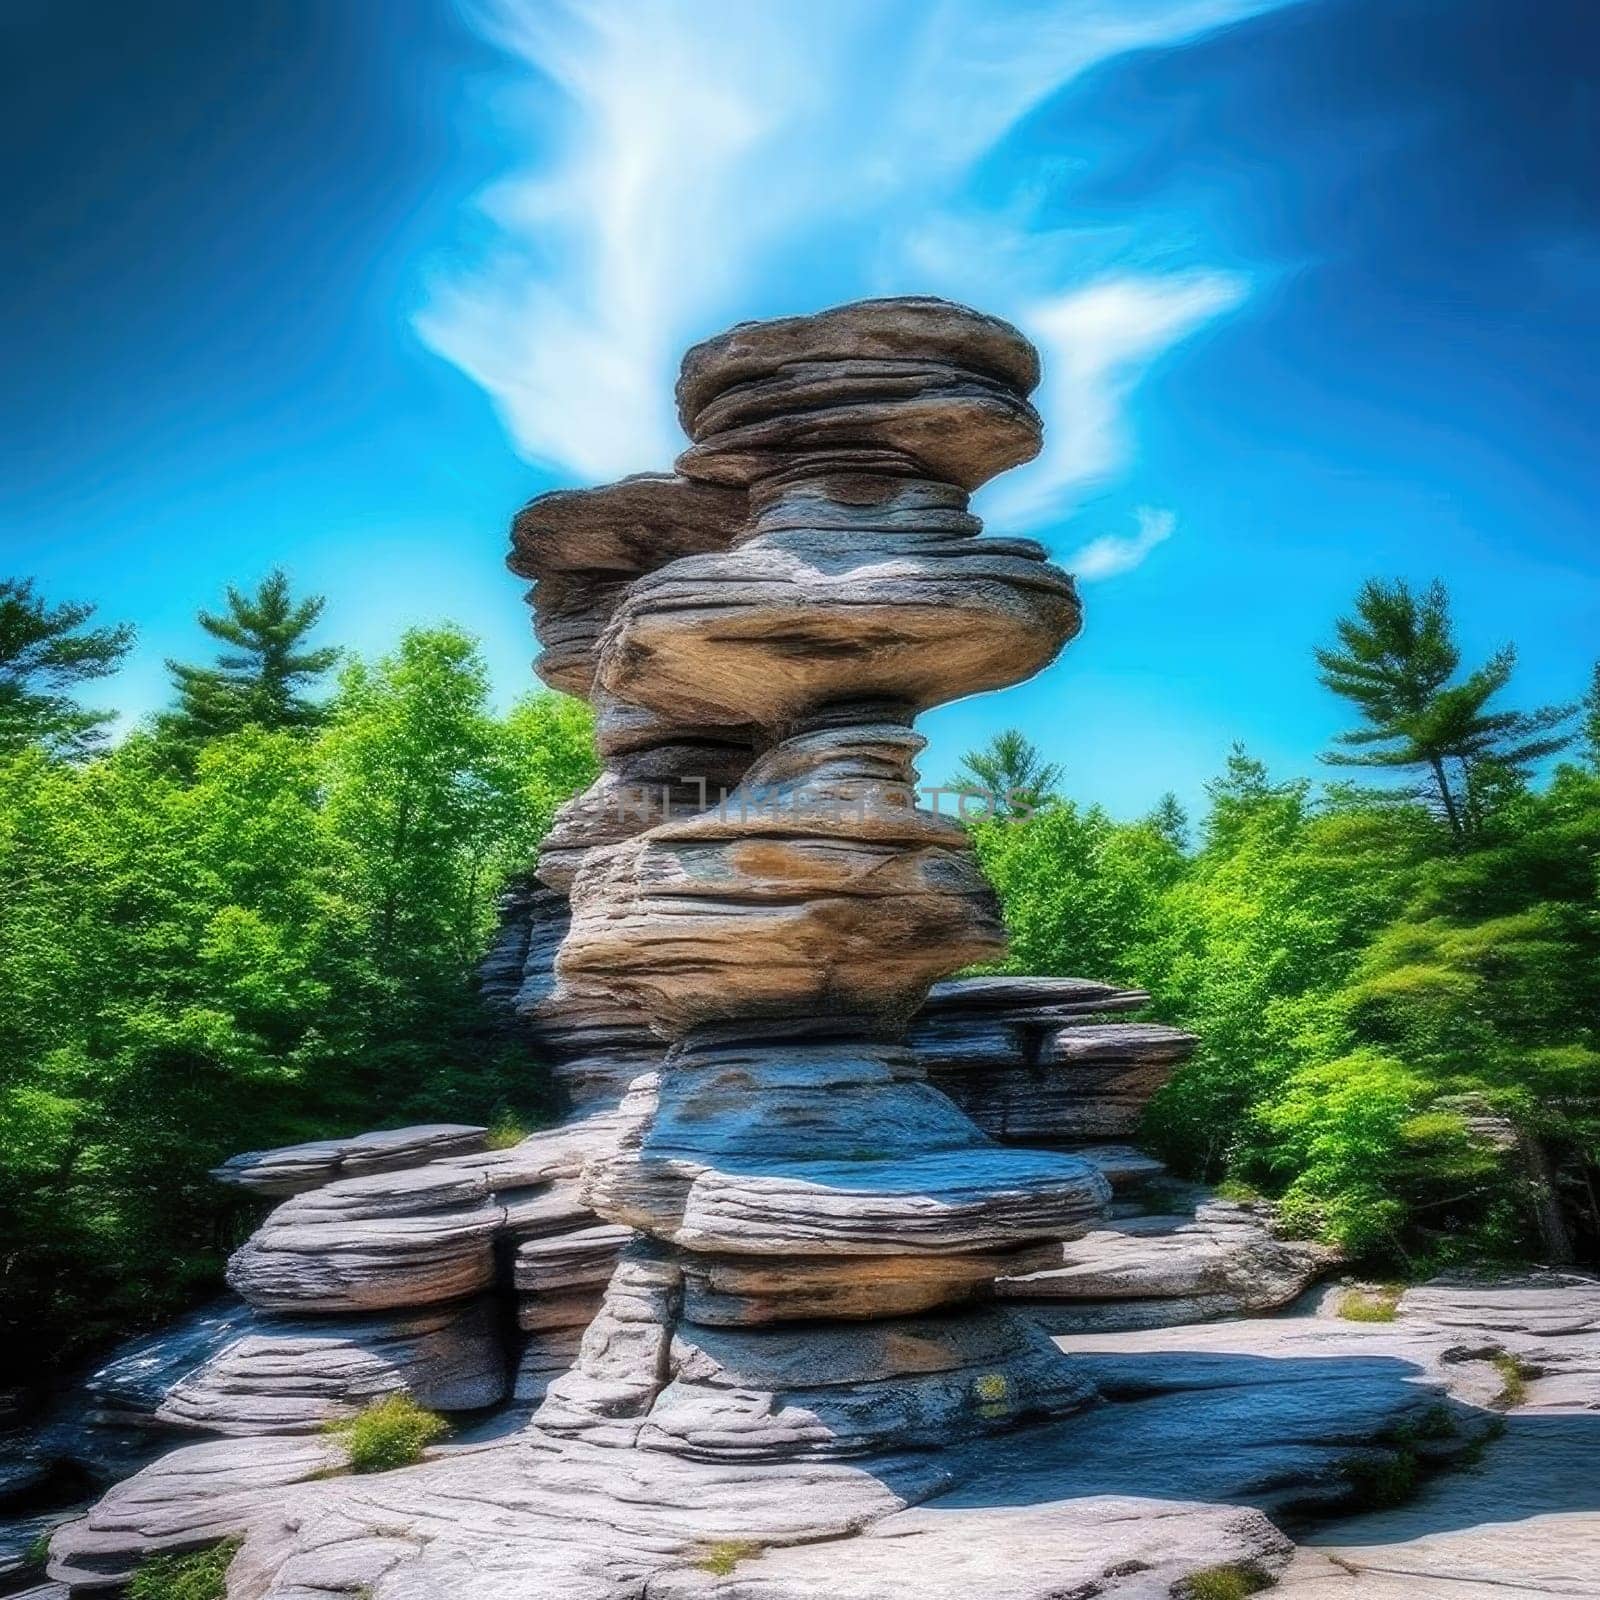 Huge rocks in the forest on a background of blue sky by eduardobellotto